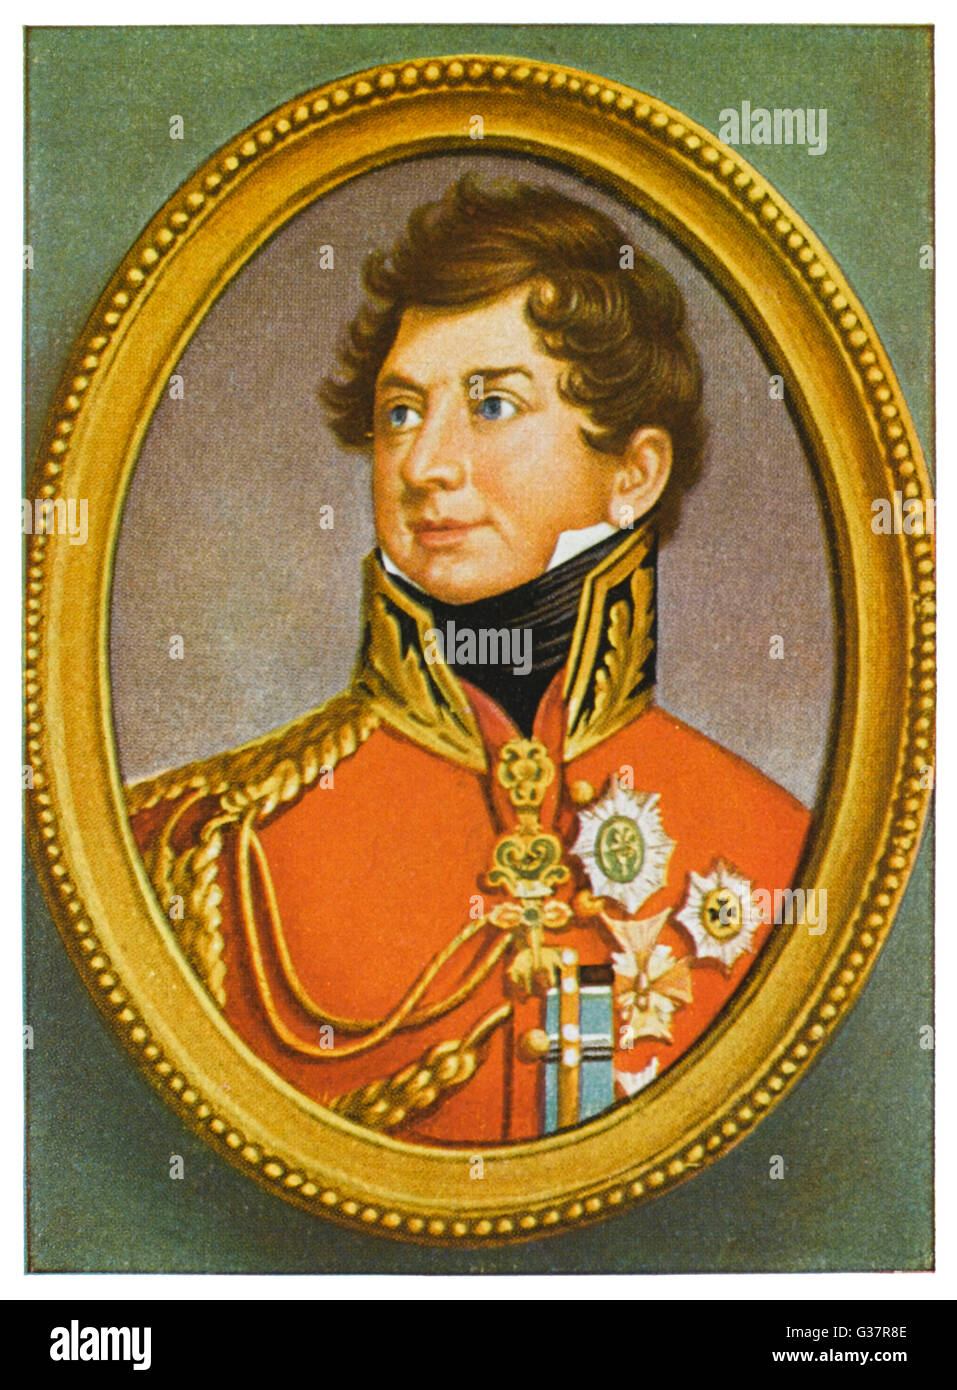 KING GEORGE IV OF ENGLAND   Reigned 1820 - 1830        Date: 1762 - 1830 Stock Photo